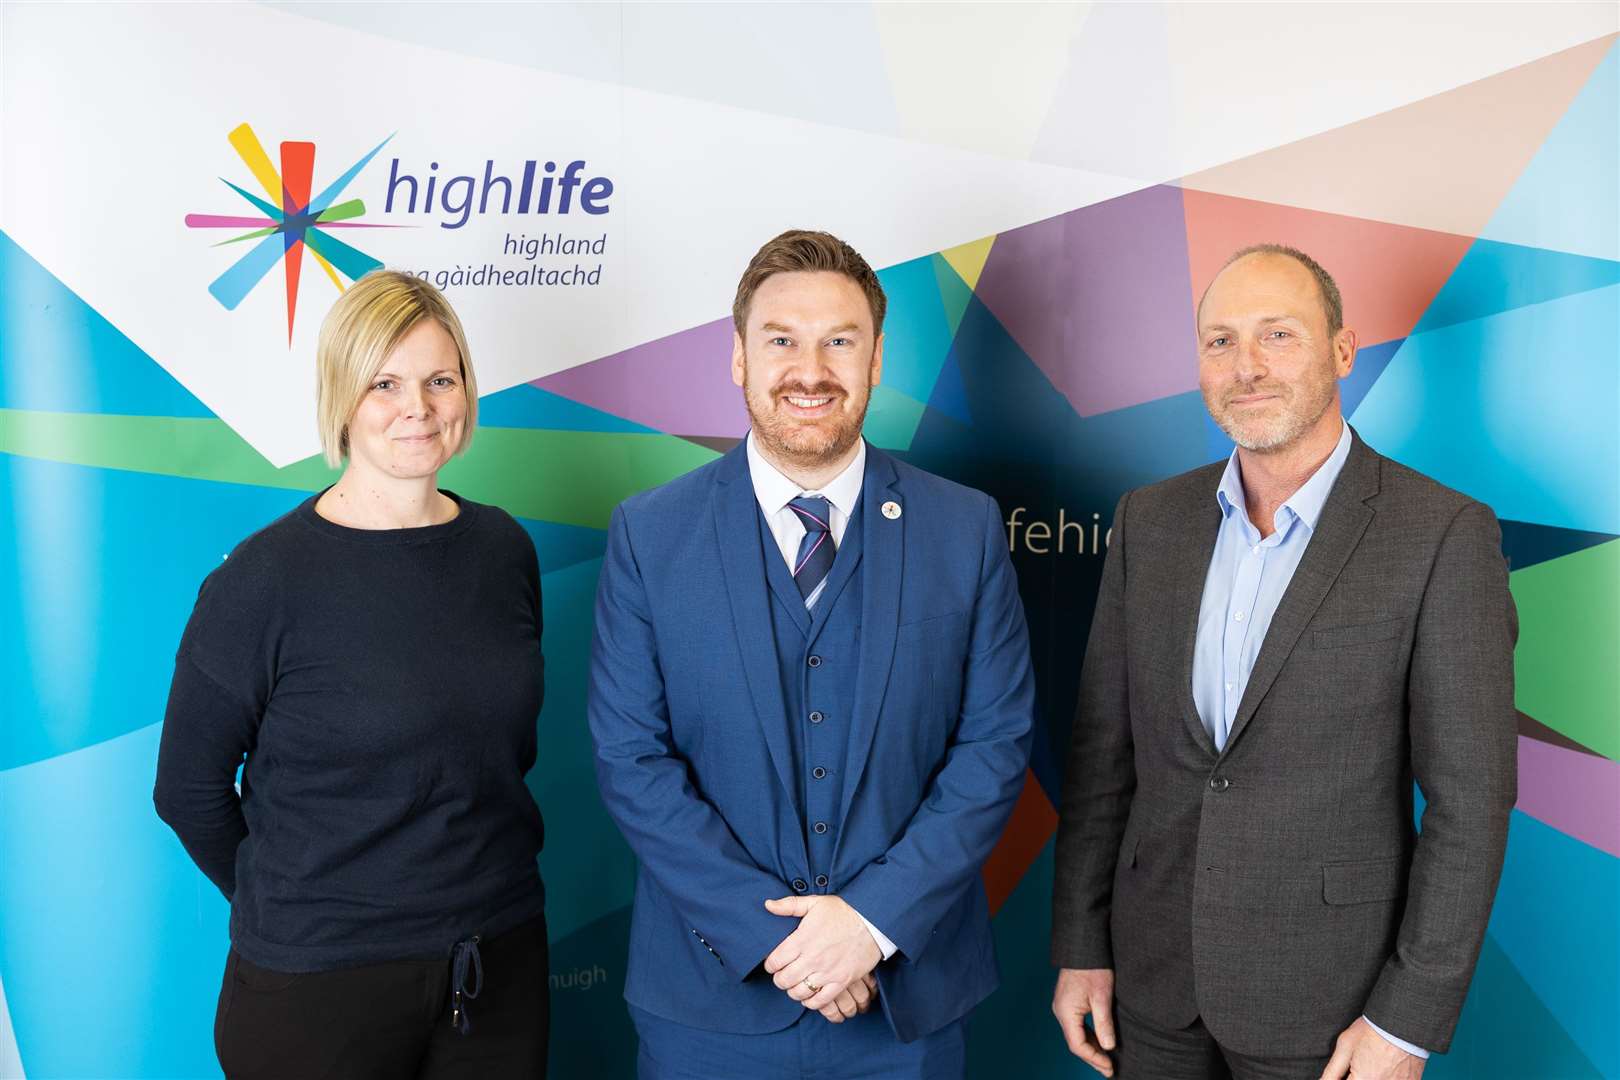 New members of High Life Highland Board (l-r) Roddy Hendry, Michael Golding and Kerry Ross.